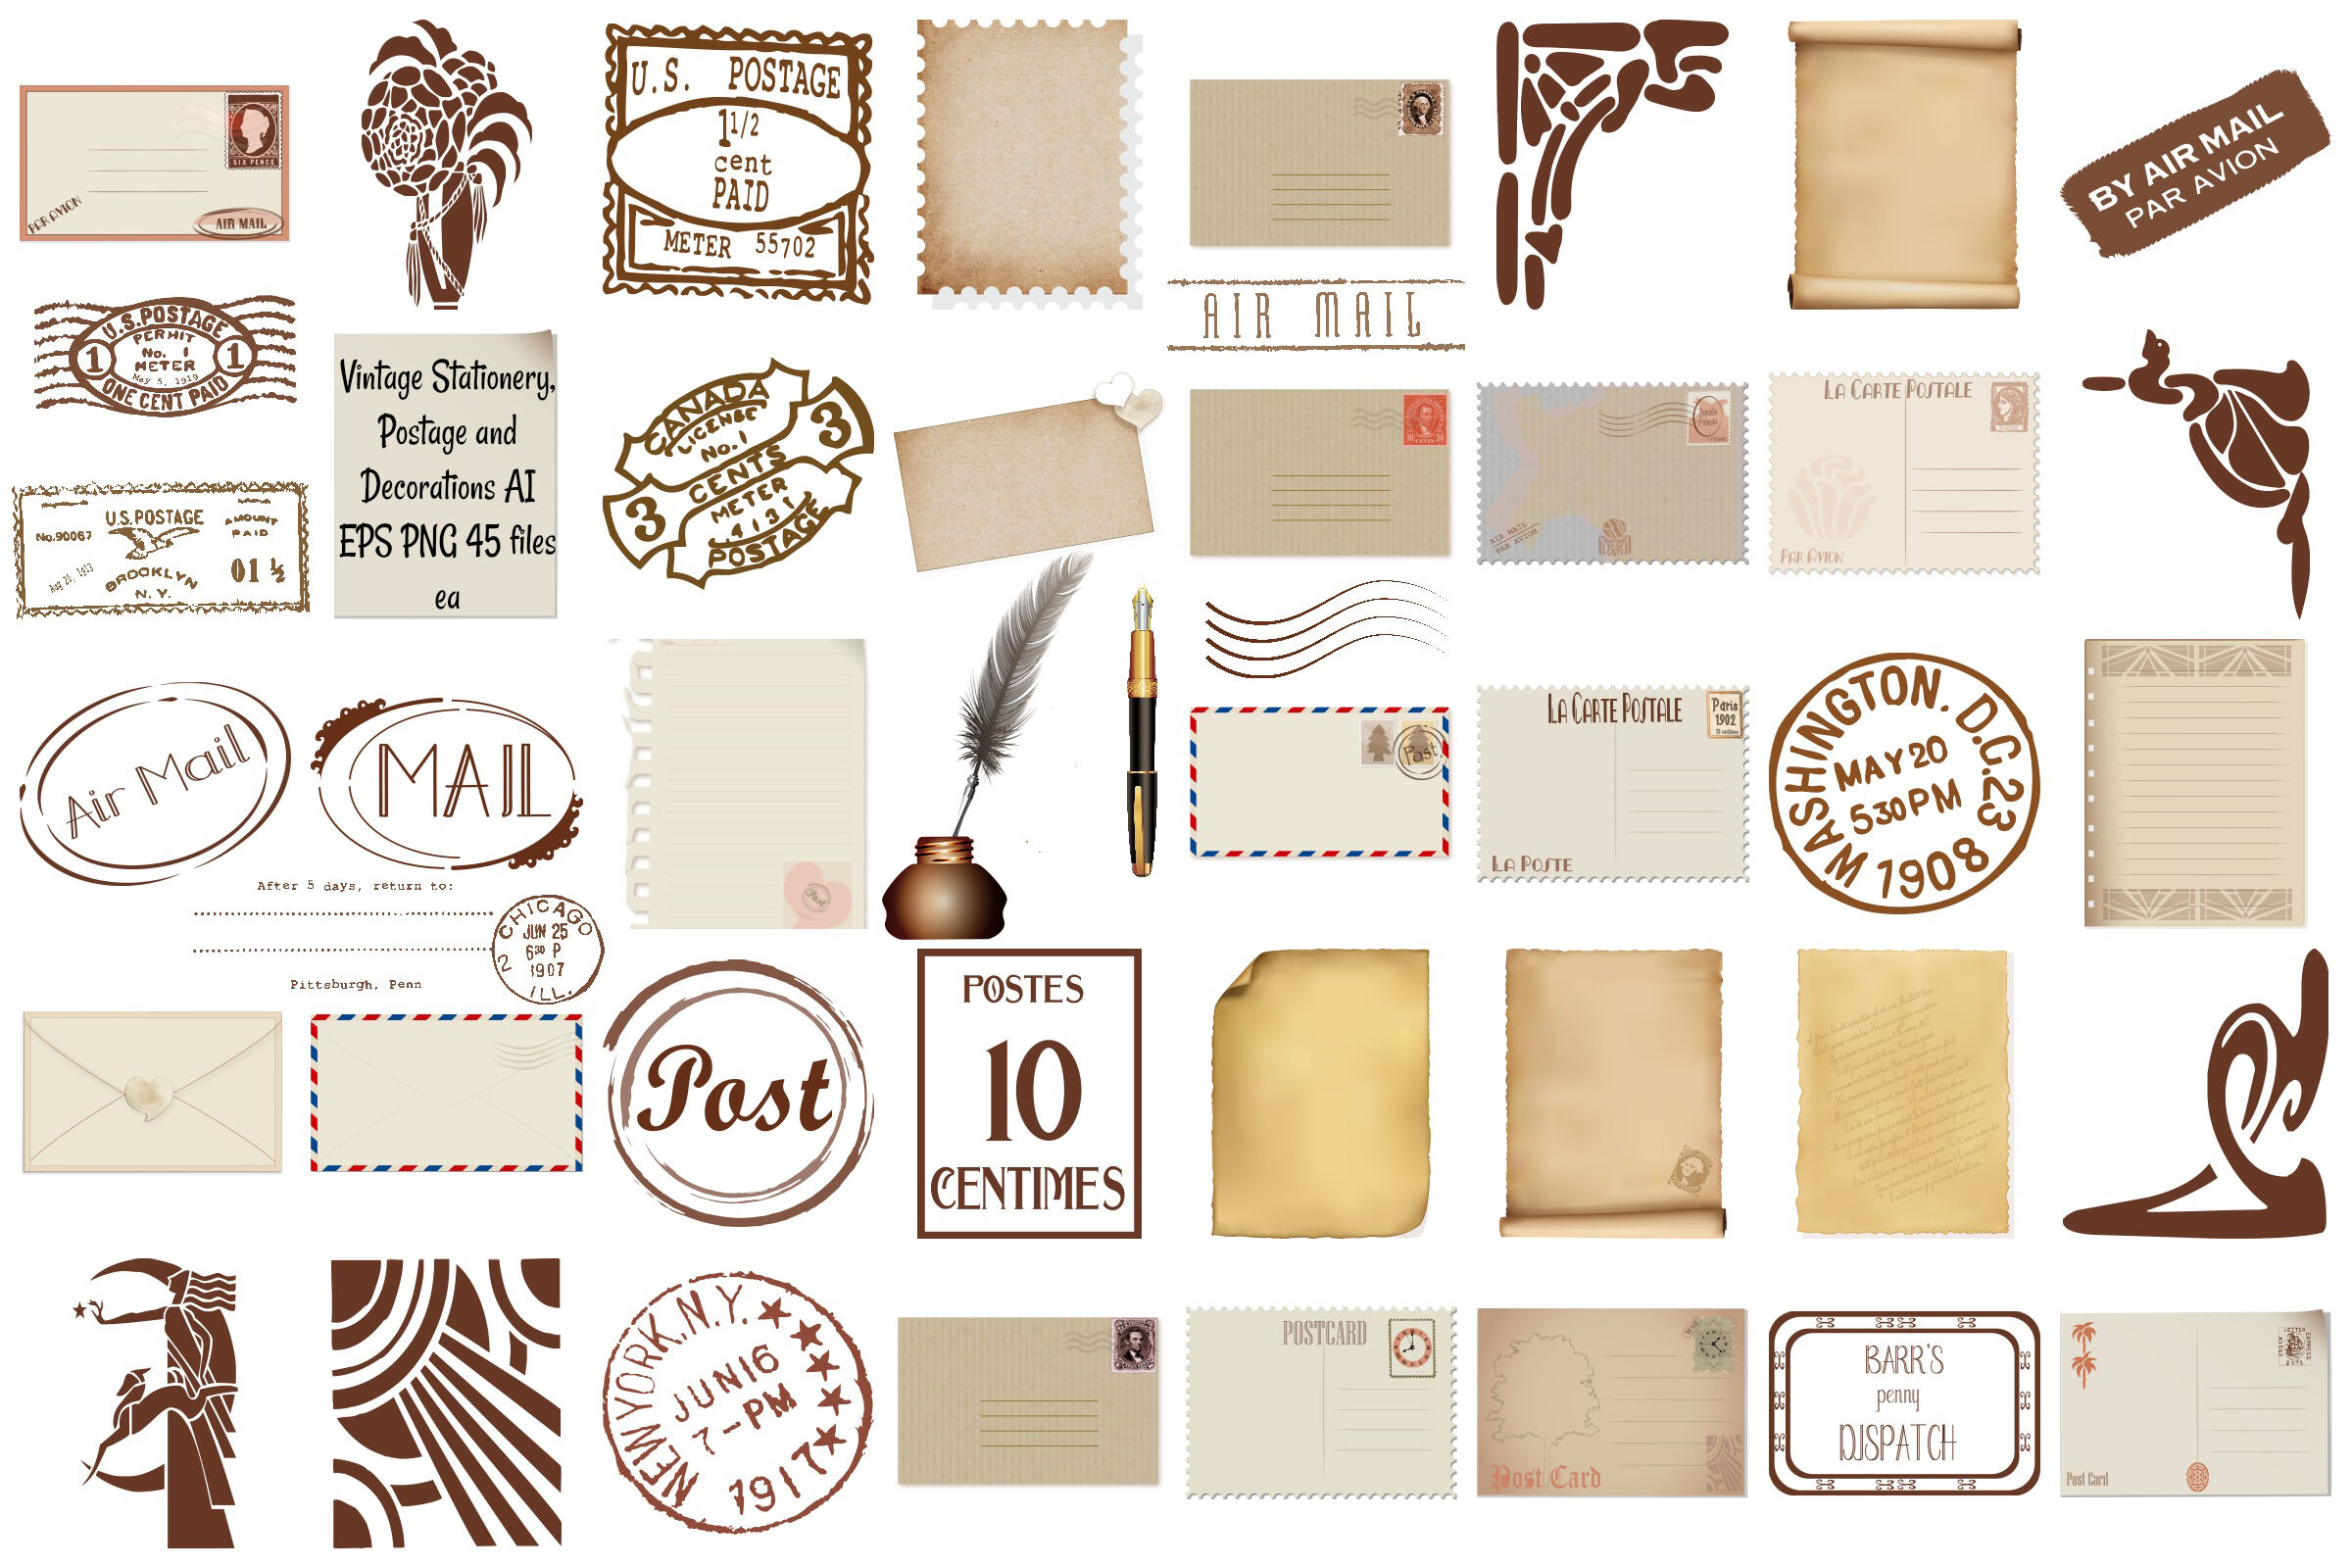 Vintage Stationery, Postage and Elements AI EPS PNG By Me and